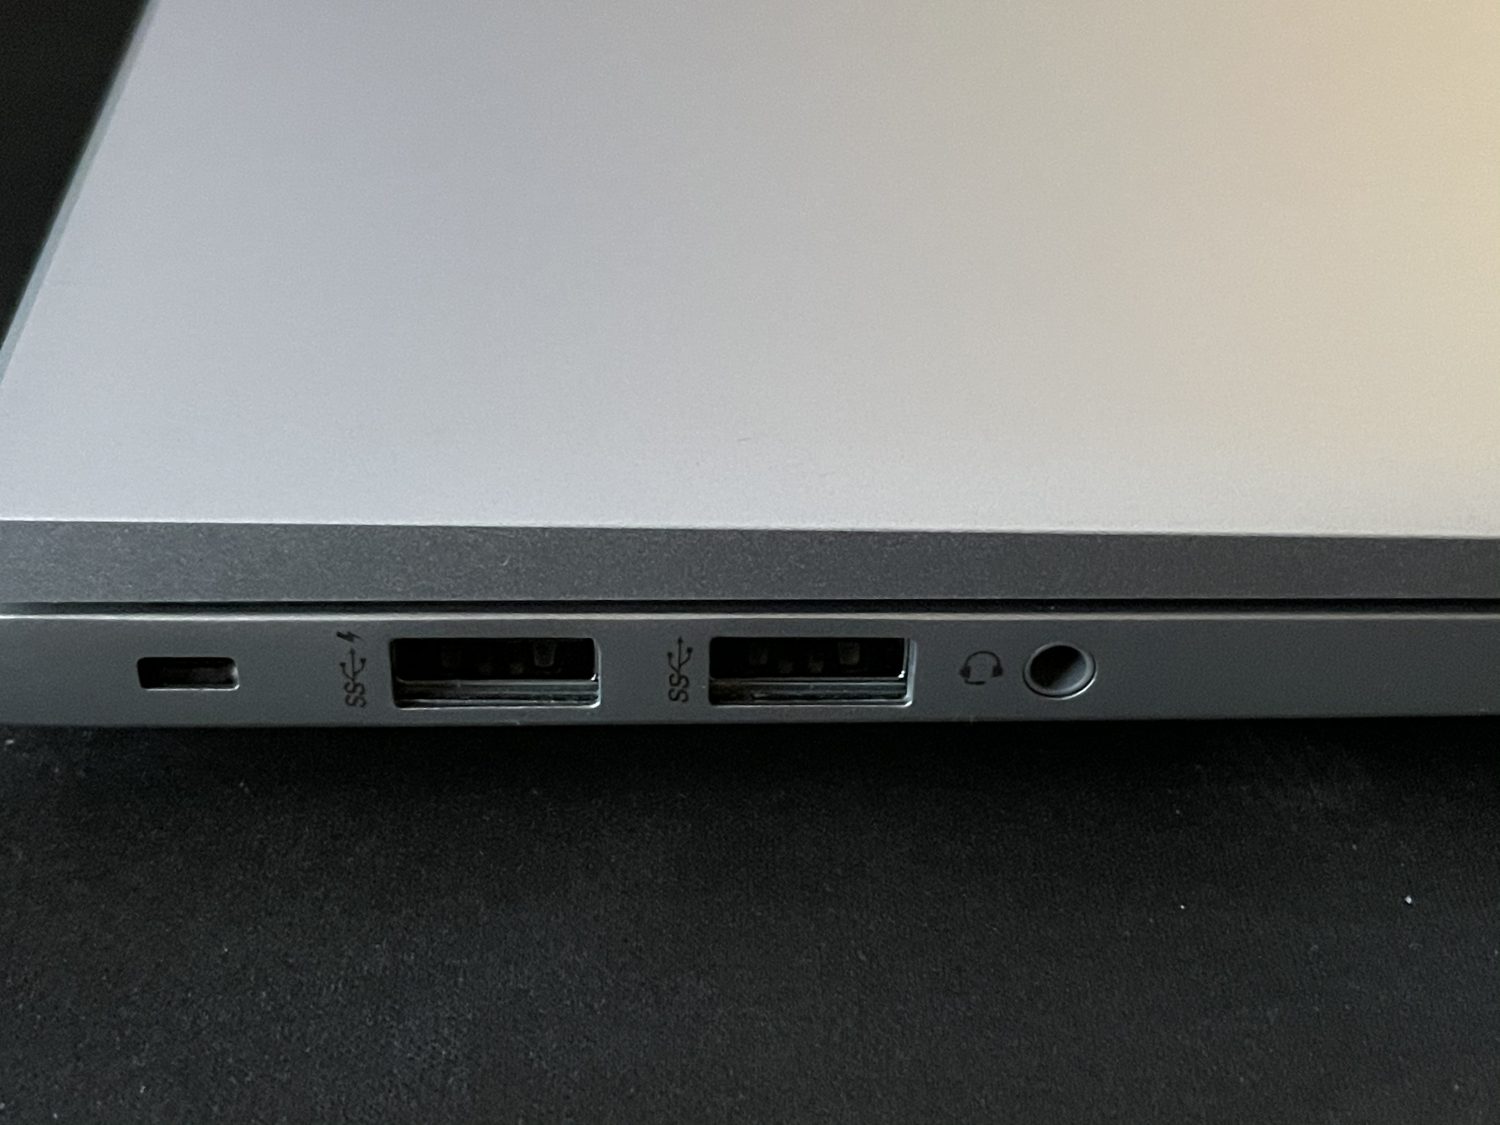 Right side of the HP EliteBook 845 G7